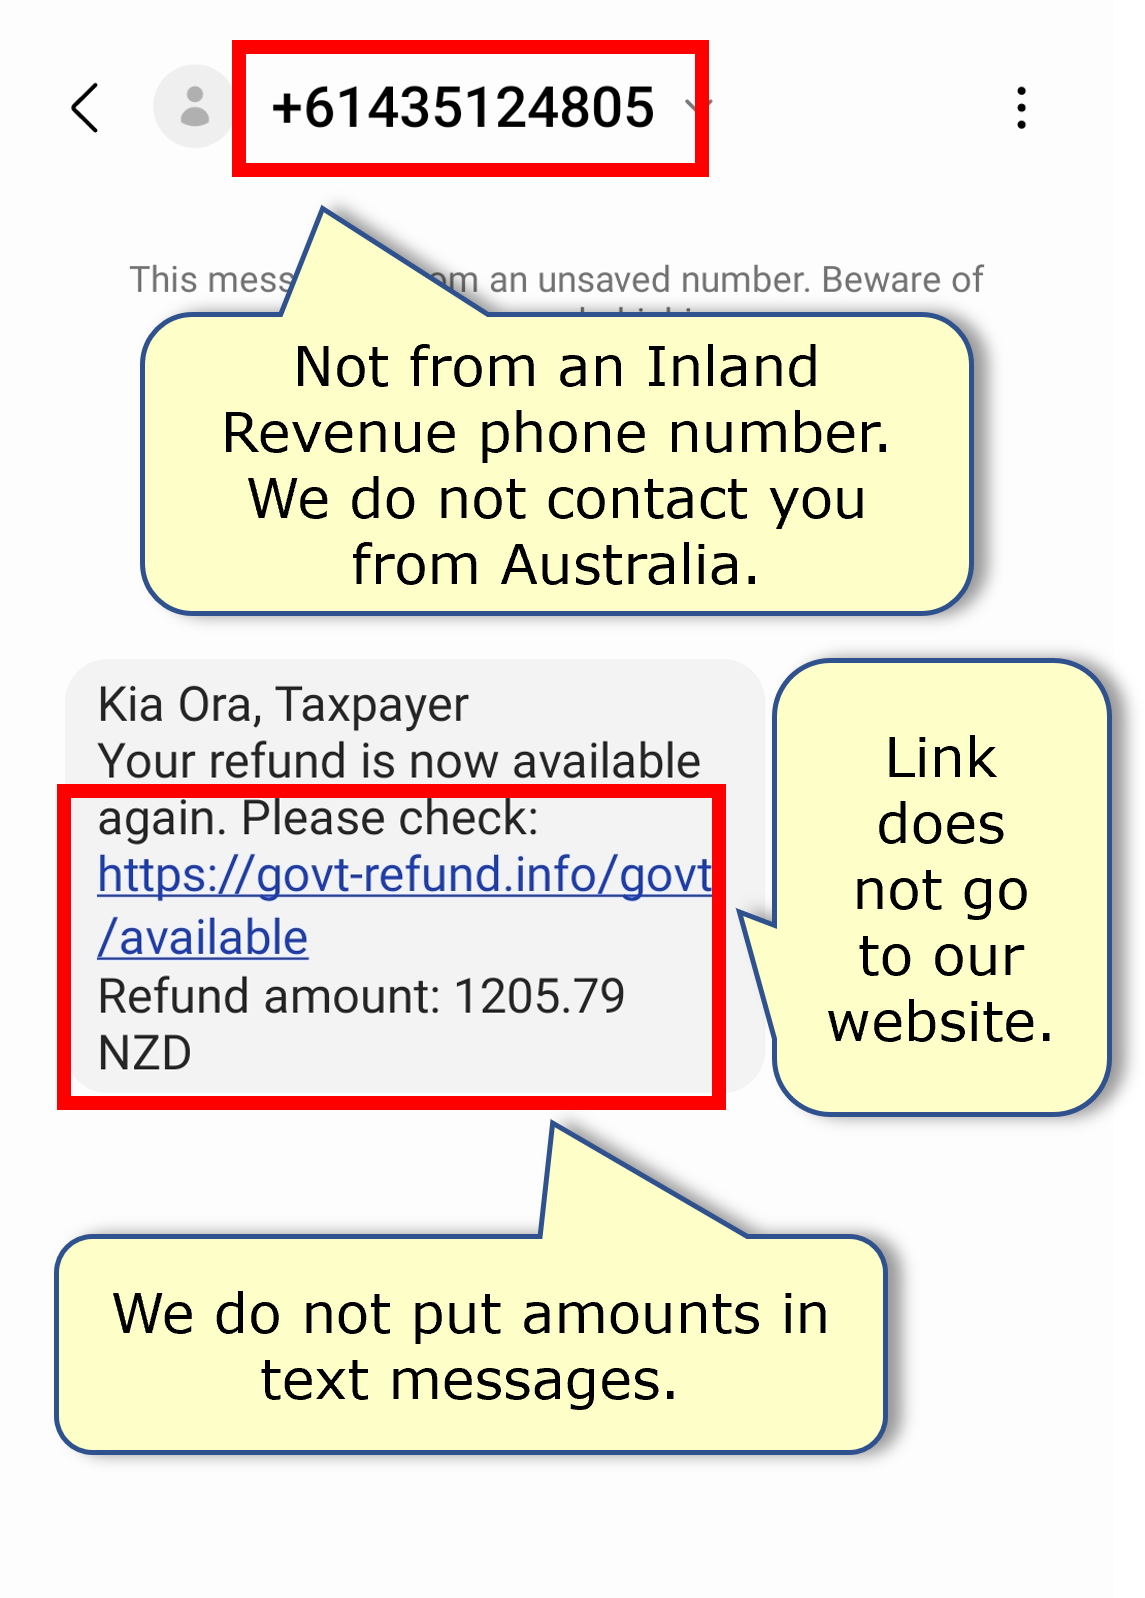 A scam text from an Australian +61 number that also shows the refund amount and goes to another website that is not ours. 